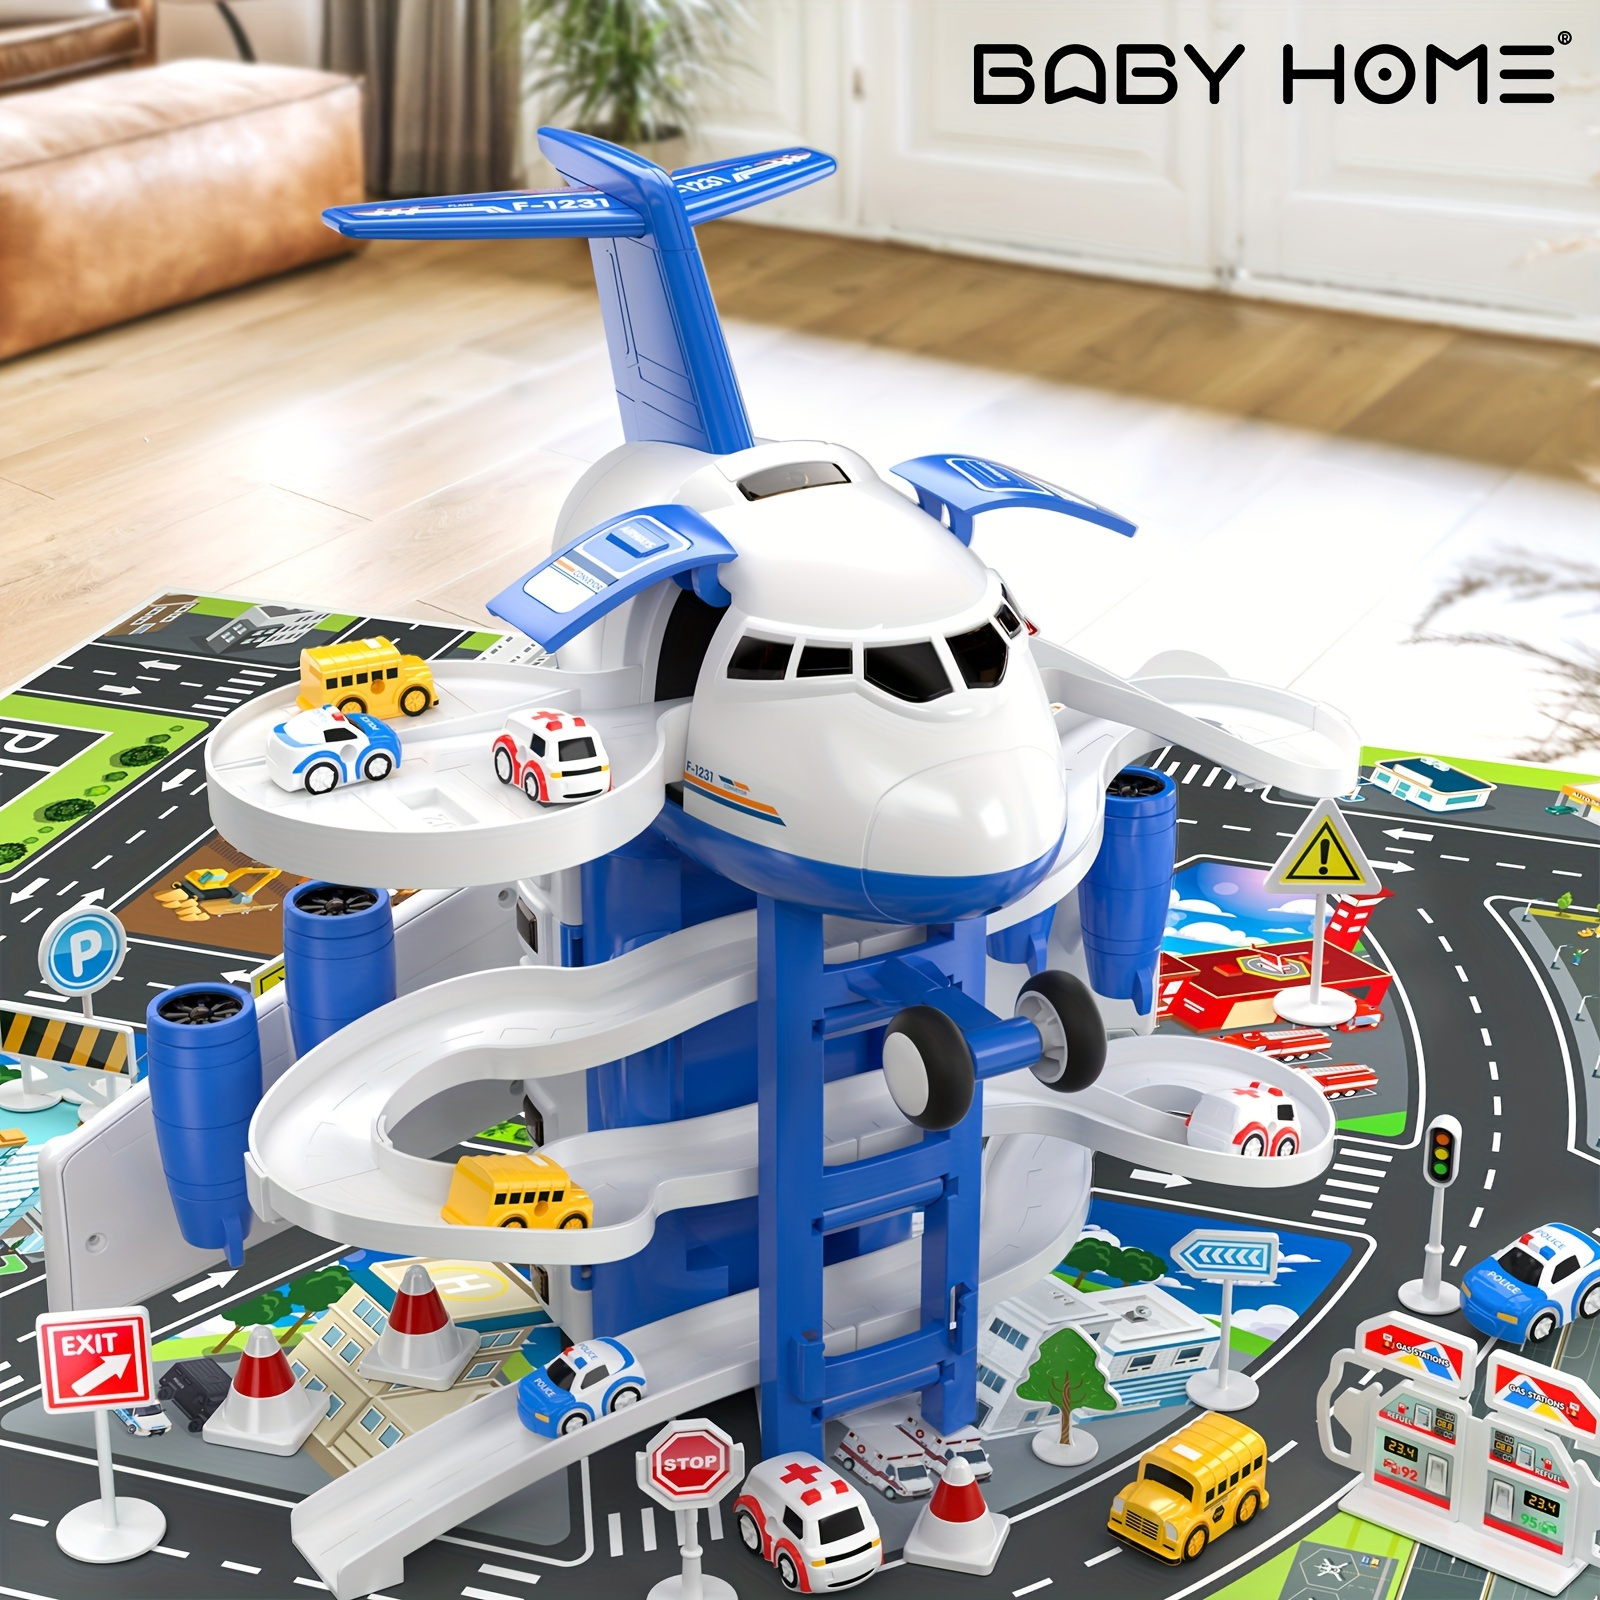 

Kids Airplane Car Toys, Simulation Inertial Aircraft Music Stroy With Light Passenger Plane Diecasts, Kids Educational Toy As Christmas, Thanksgiving, Gift